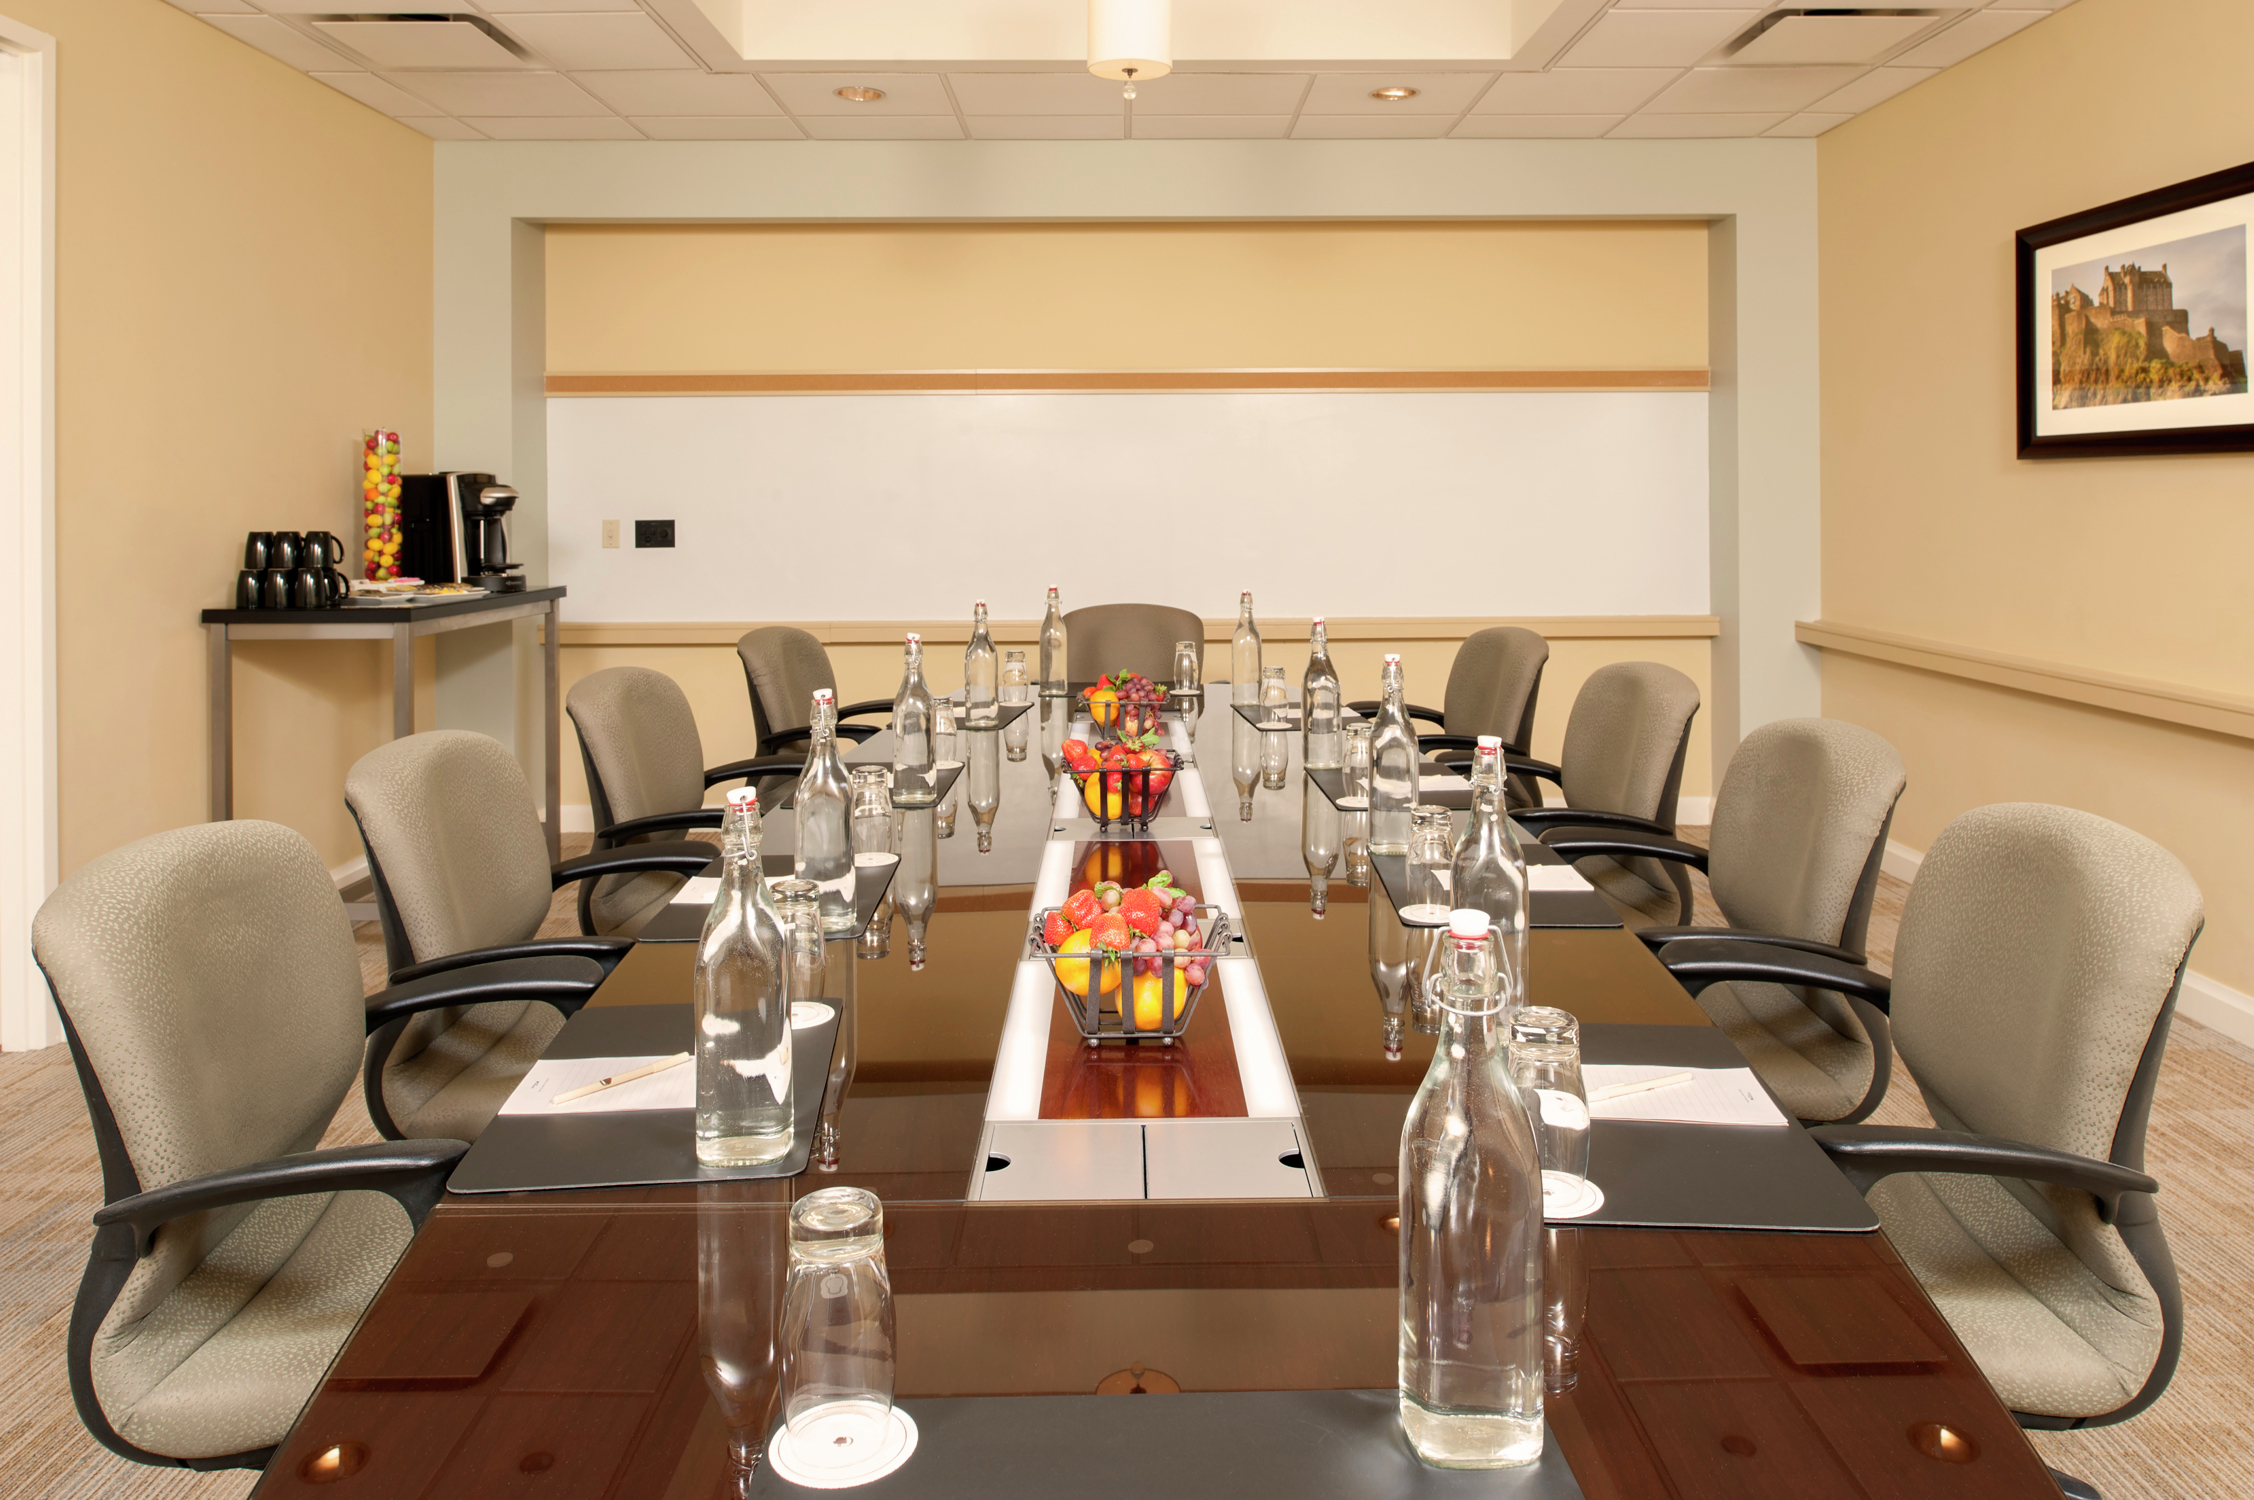 Water Pitchers, Bowls of Fruits, Notepads, and Chairs at Boardroom Table